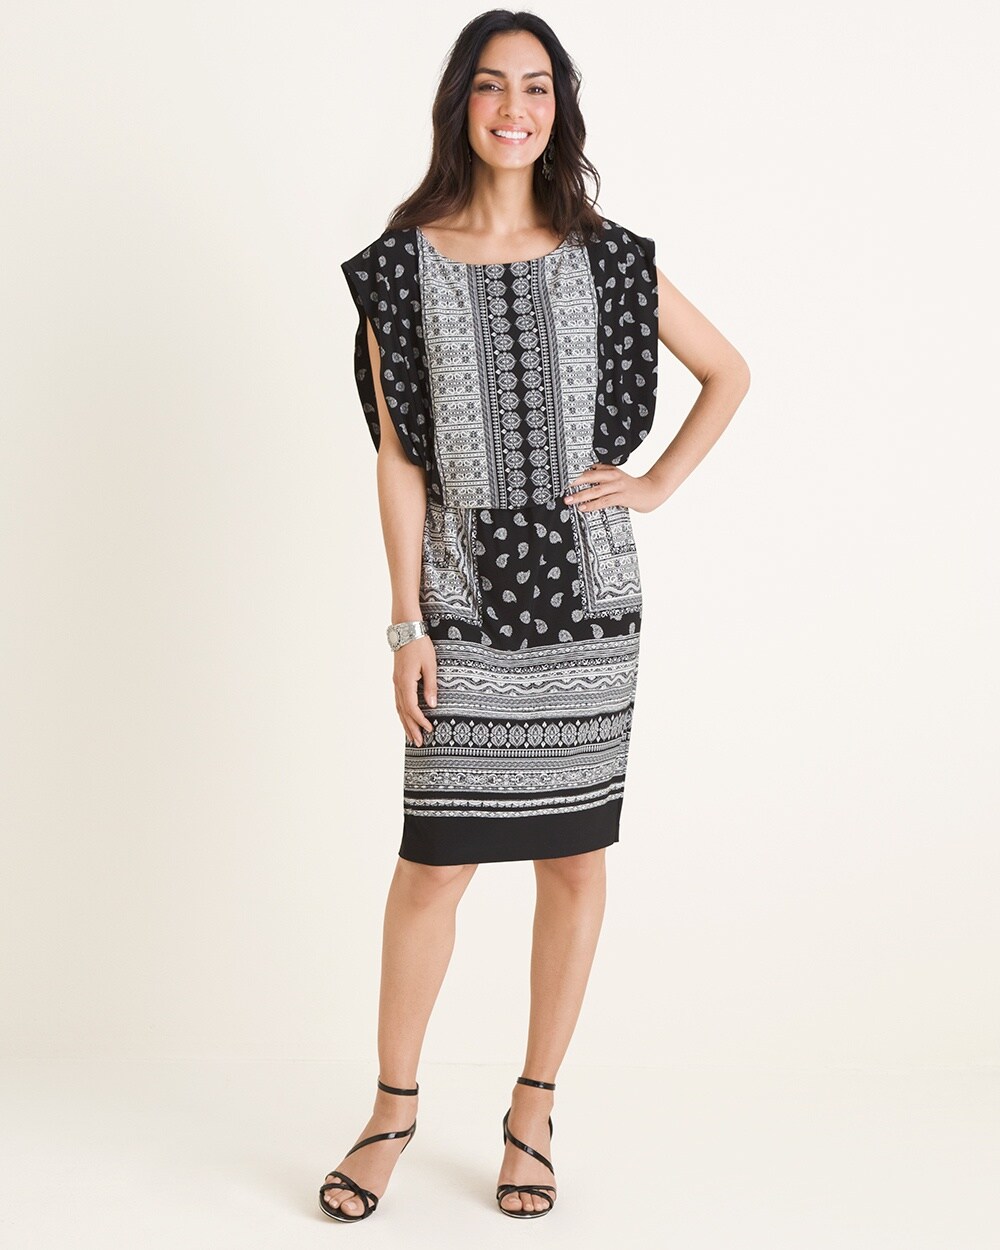 Black and White Patterned Dress